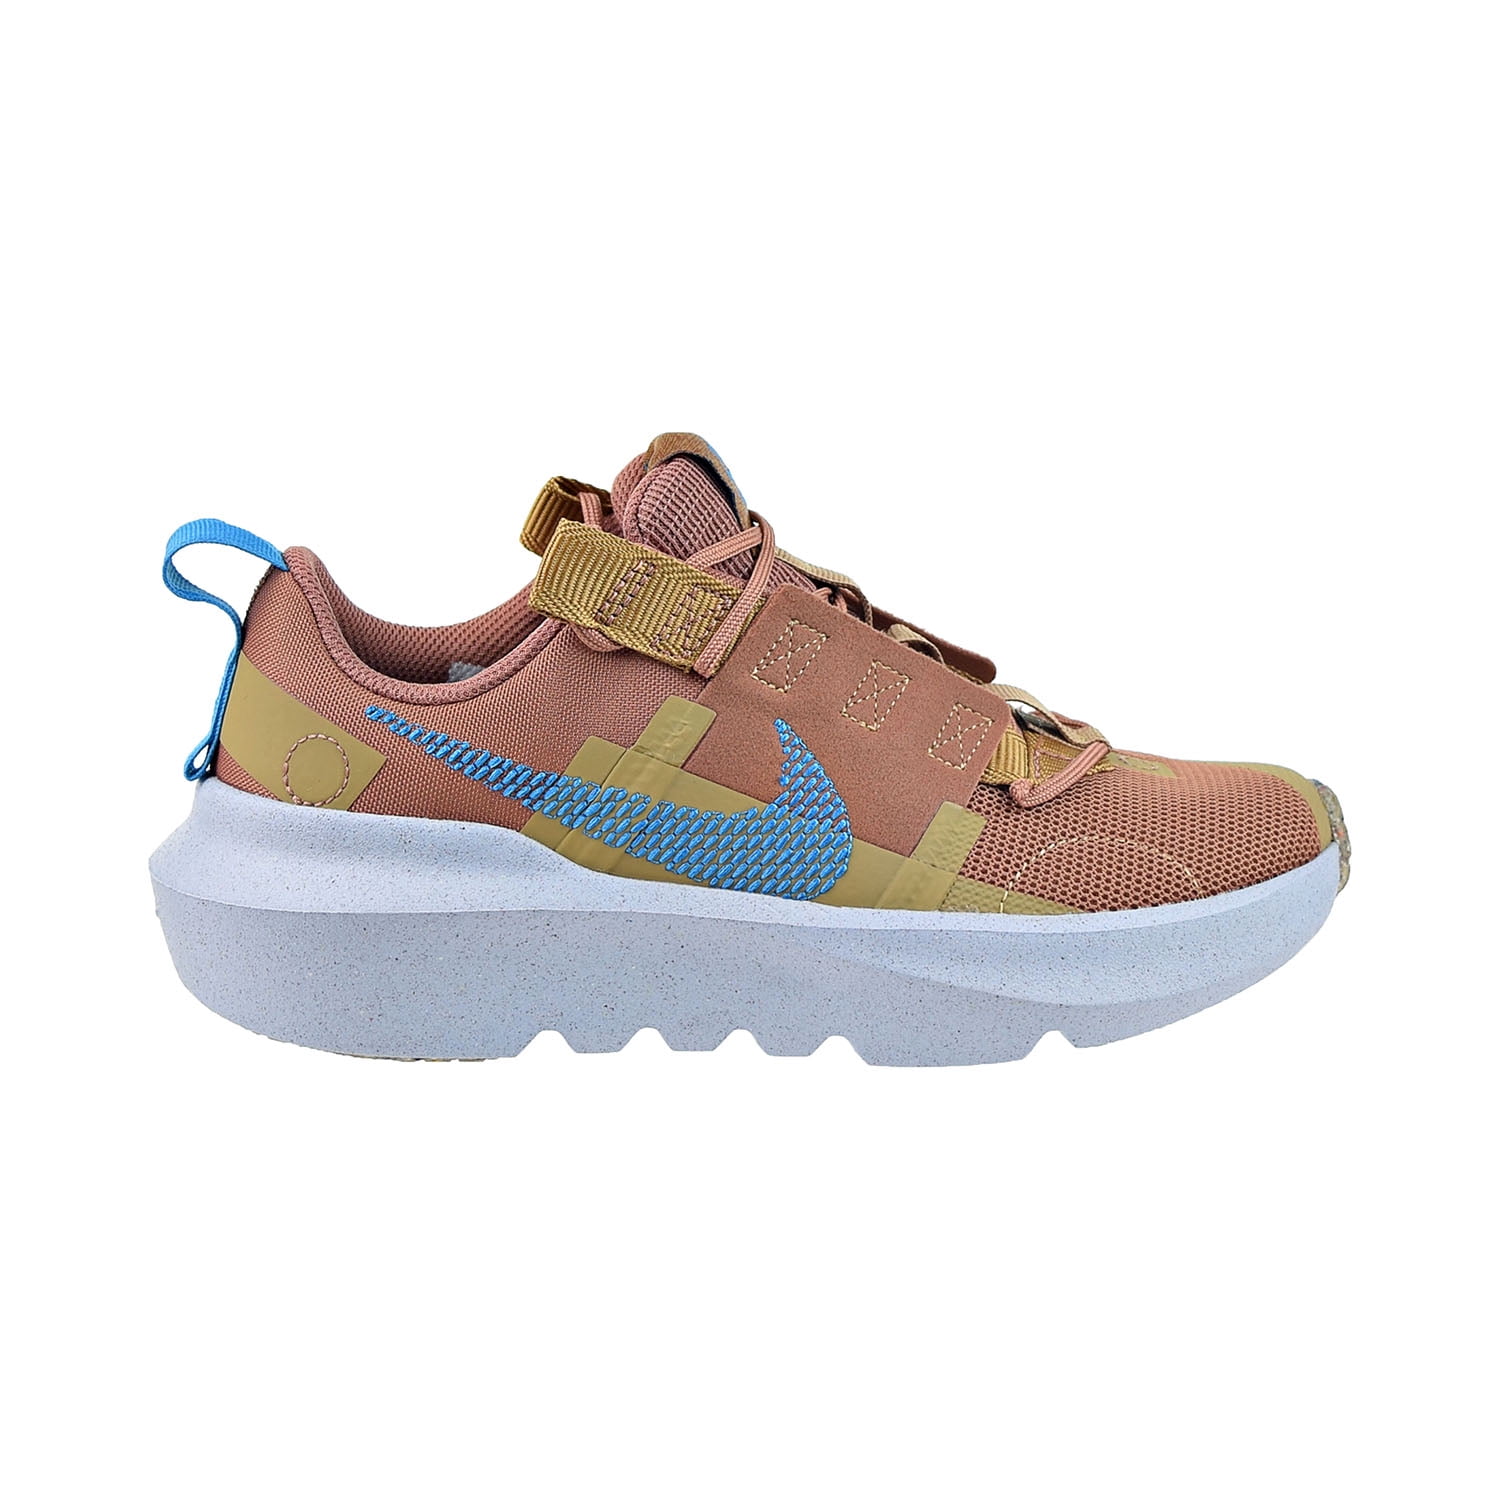 wees gegroet tweedehands Lucky Nike Crater Impact (GS) Big Kids' Shoes Mineral Clay-Laser Blue-Gold  db3551-201 - Walmart.com